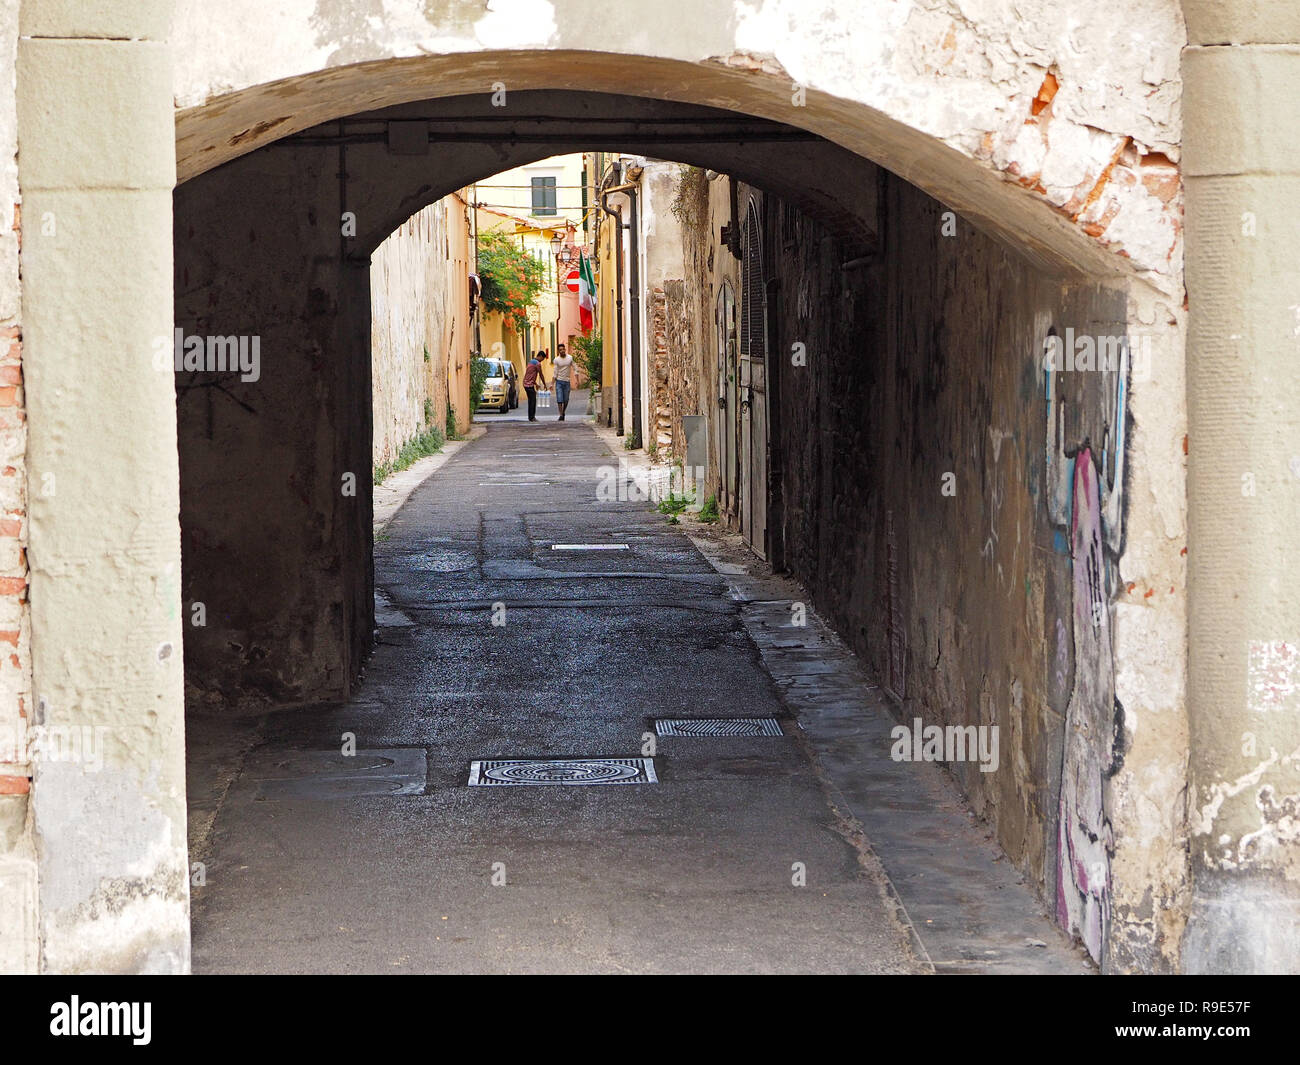 two men carry pack of bottled water below shuttered windows in typical narrow street with manhole covers and graffiti under archway in Pisa, Italy Stock Photo